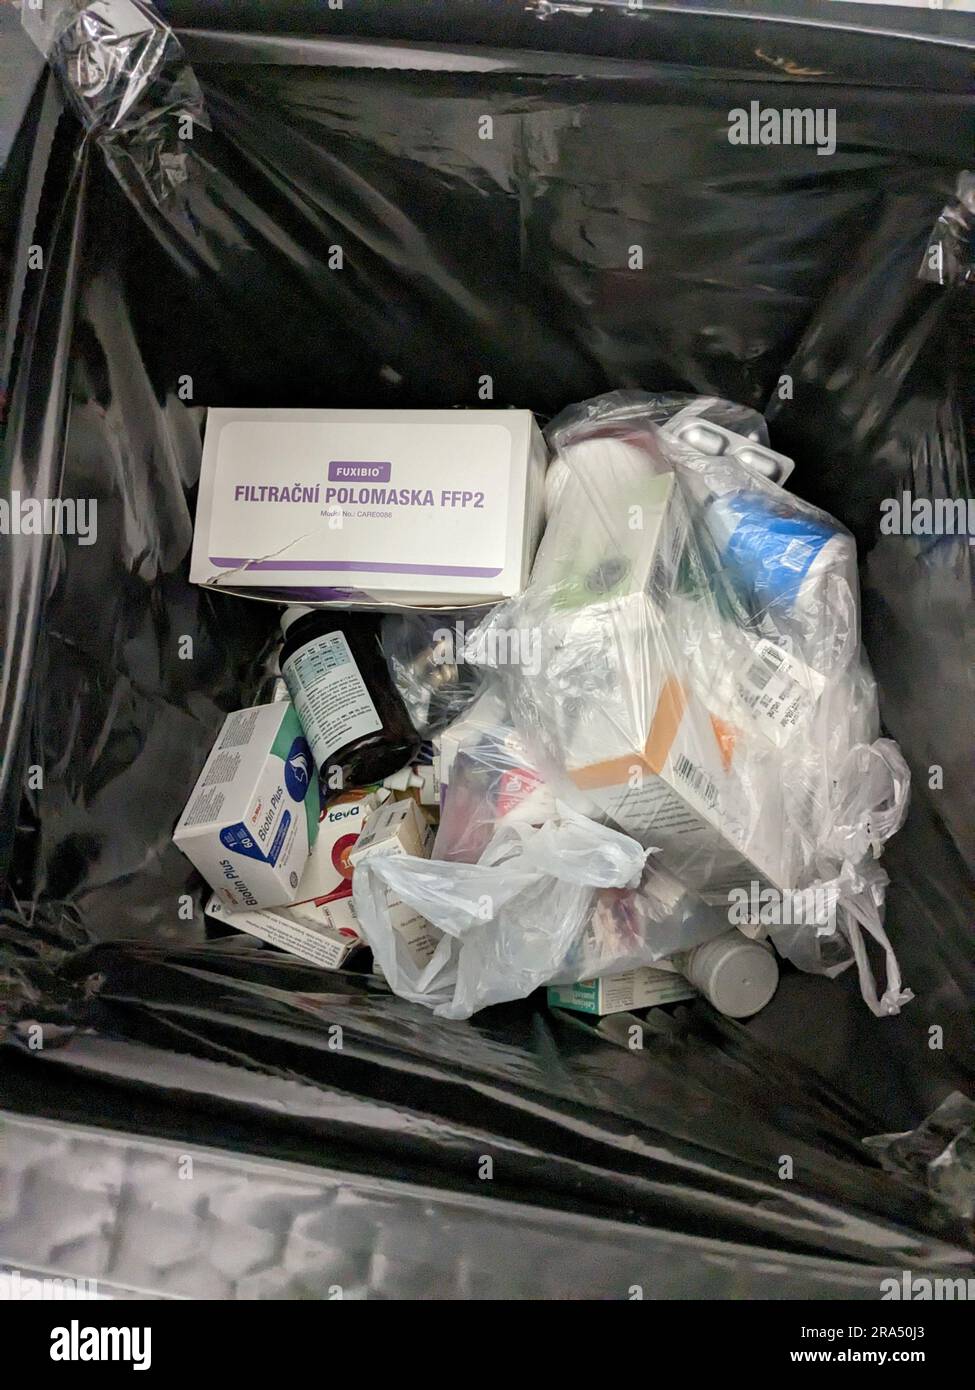 https://c8.alamy.com/comp/2RA50J3/wasting-with-drugs-sometimes-unopened-packs-are-thrown-away-to-pharmacy-special-garbage-binunused-medicine-cost-huge-amount-of-money-from-health-care-2RA50J3.jpg